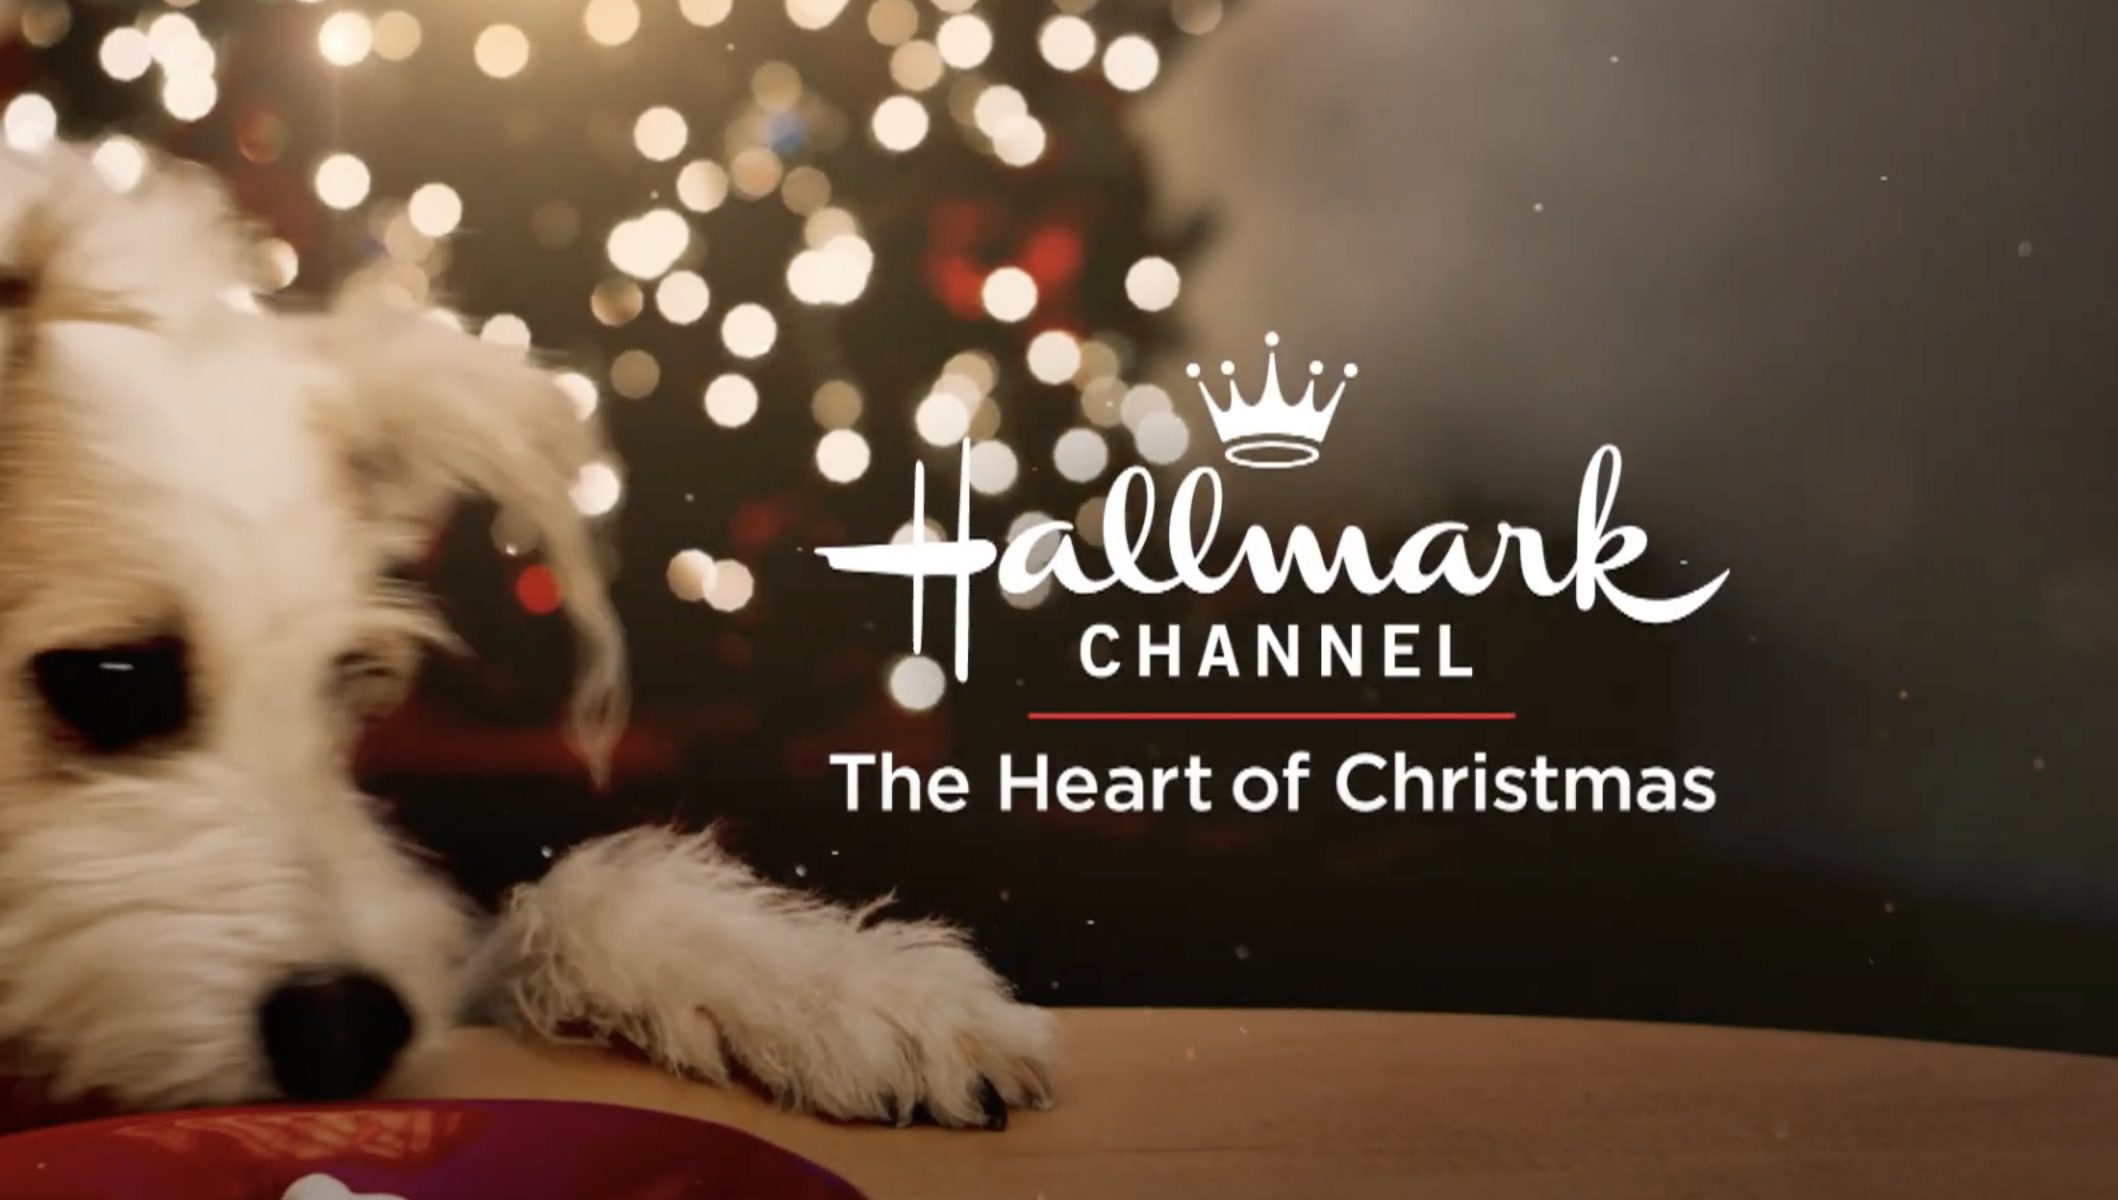 How to Watch New 2020 Hallmark Christmas Movies in Canada